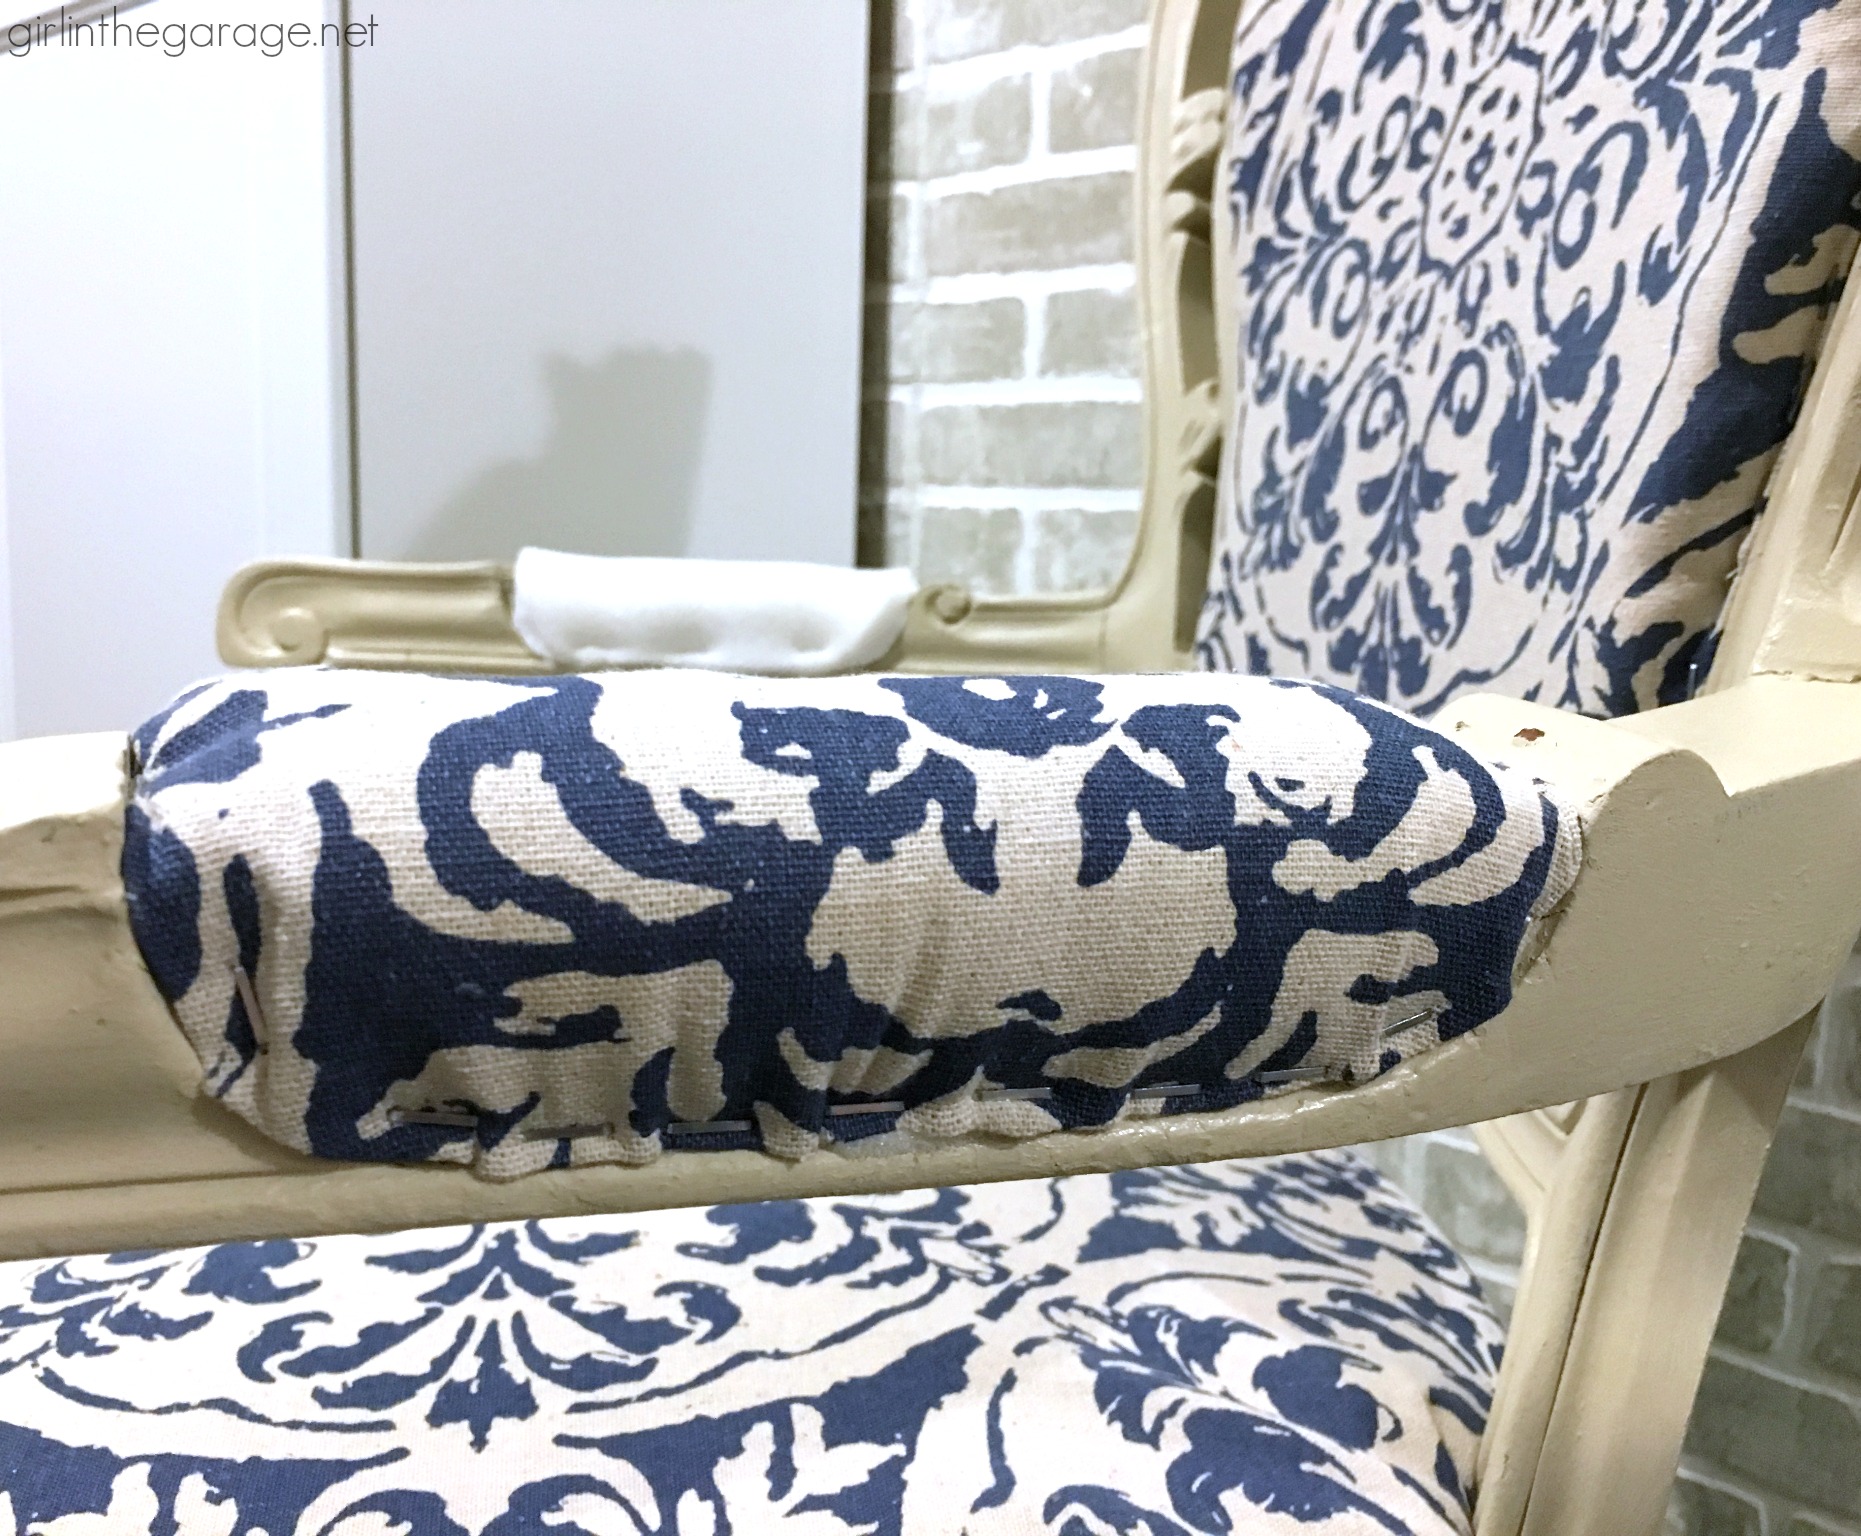 DIY Reupholstered chair makeover with Chalk Paint and clearance curtain as fabric - Girl in the Garage